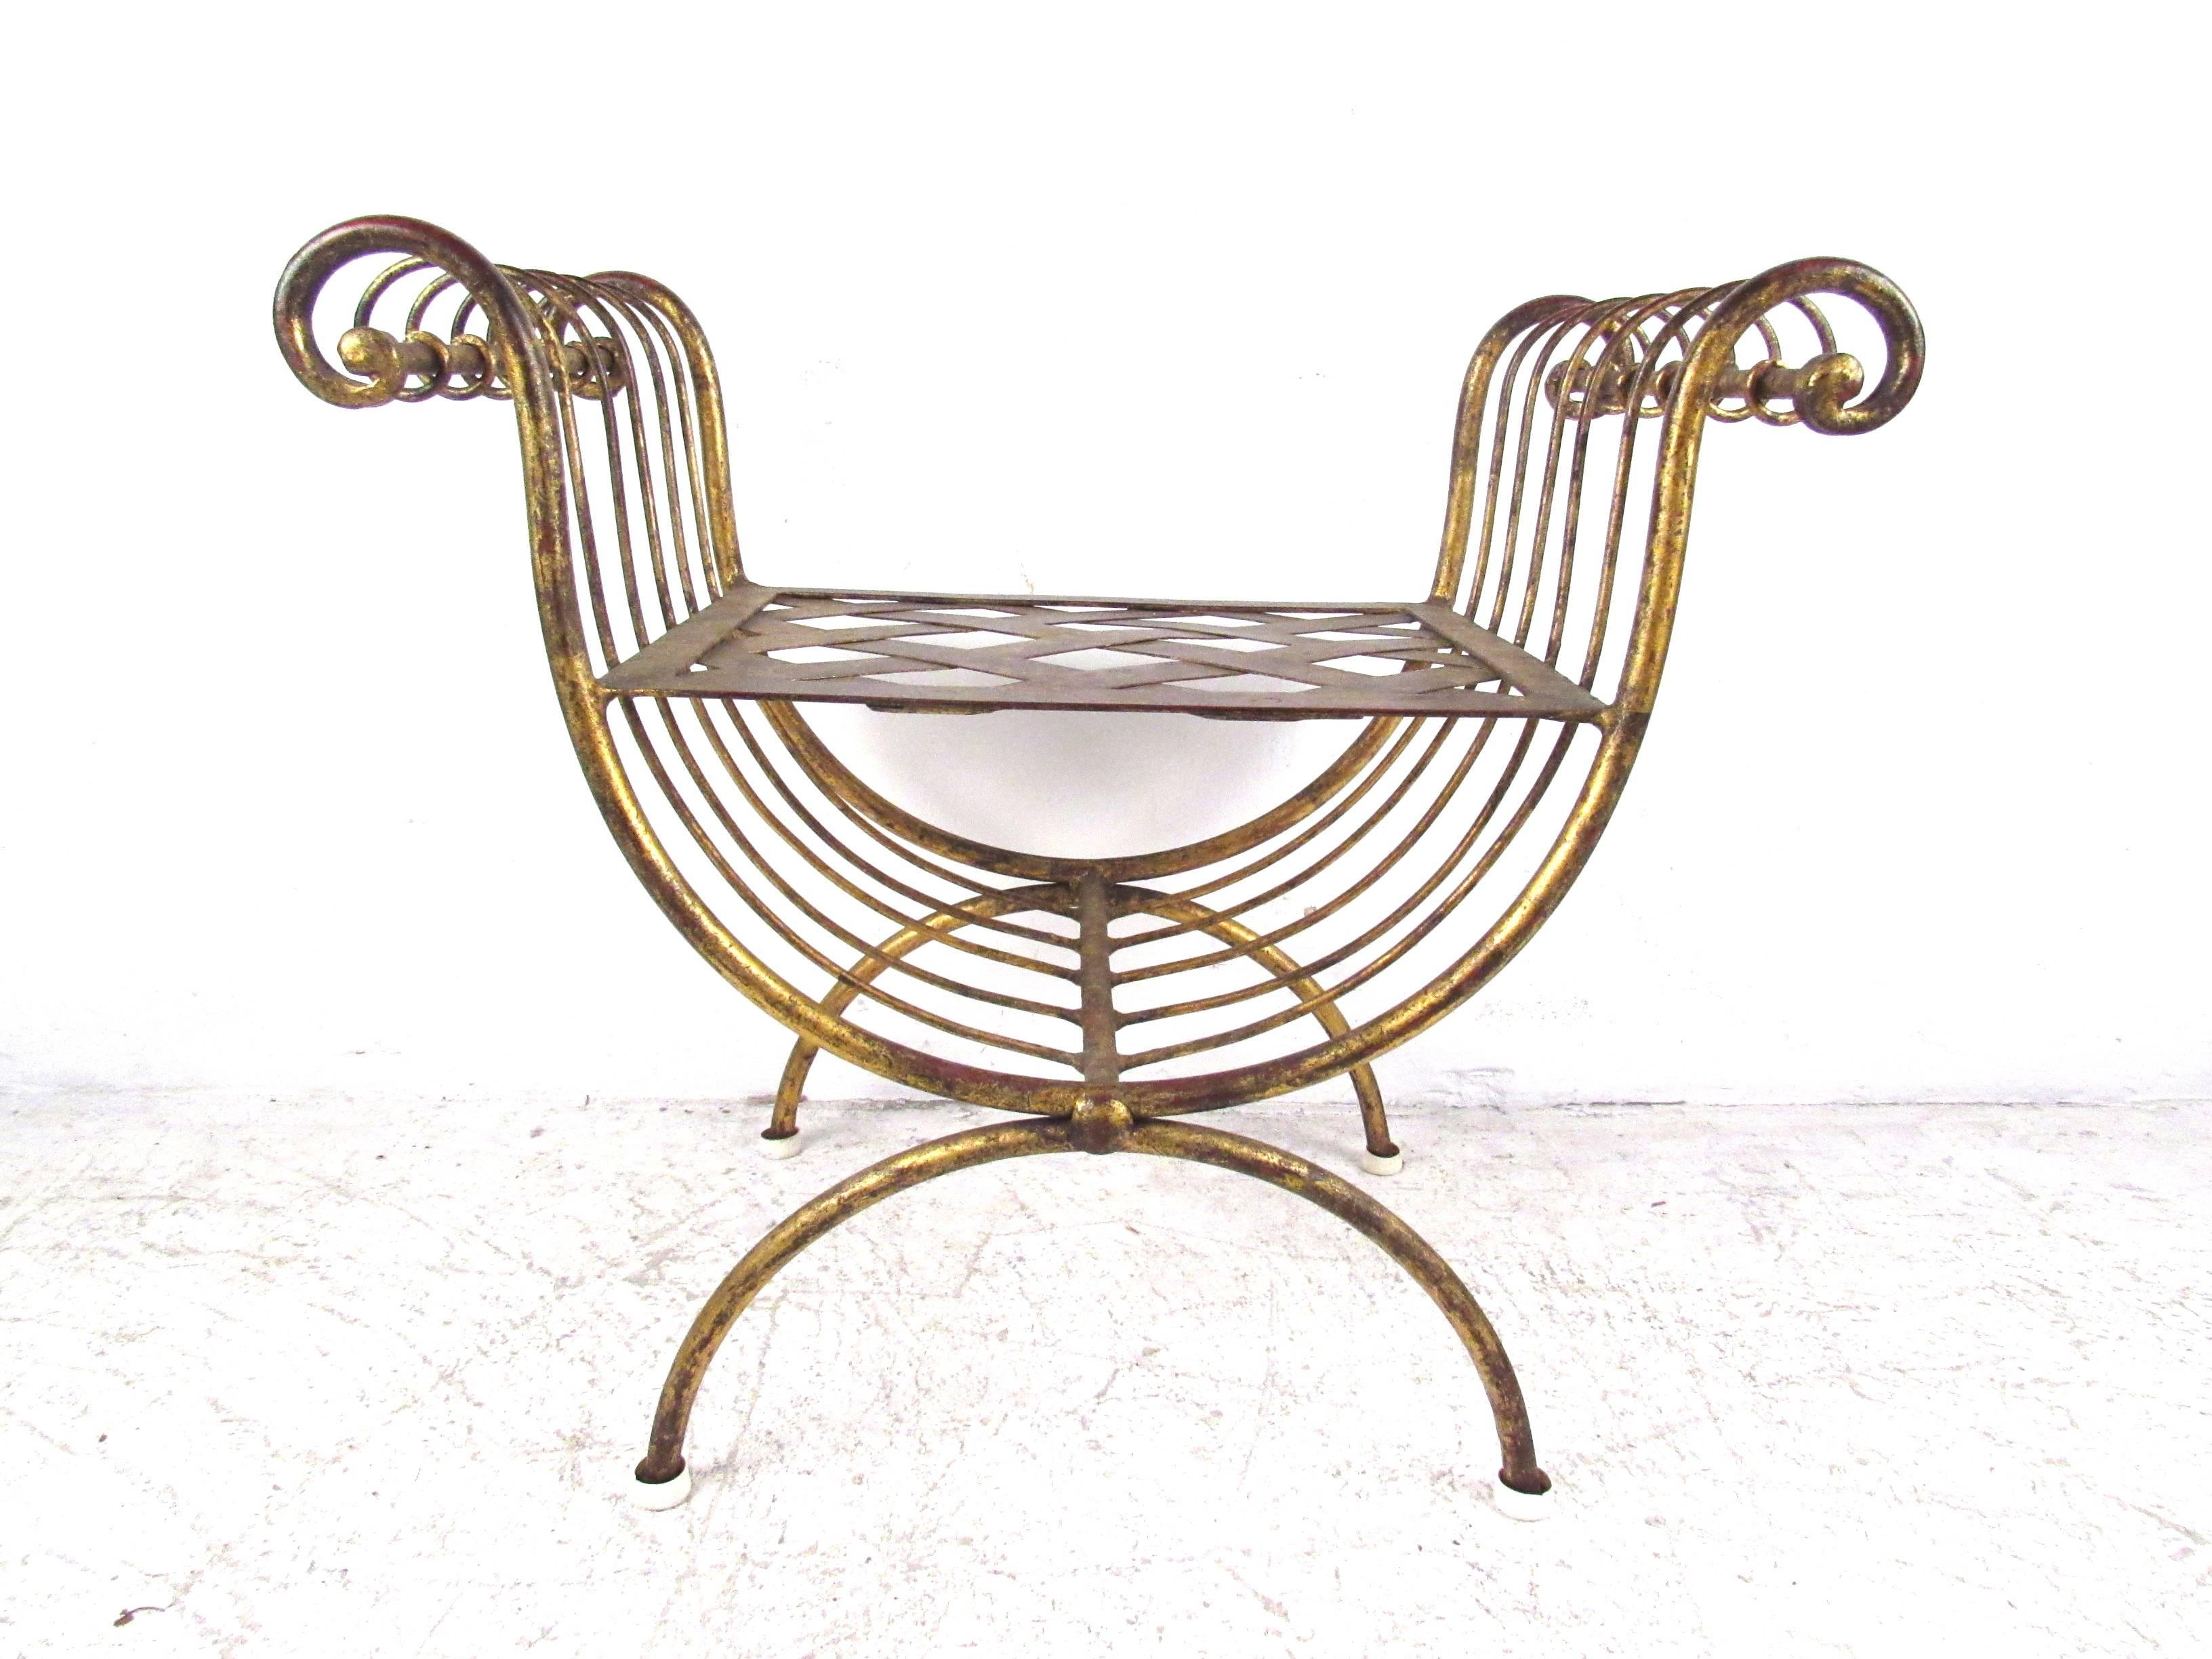 This Mid-Century Modern brass finish stool features a unique scroll style frame with cross thatch seat. Unique distressed finish shows patina and some oxidation, creating a wonderful vintage look. Please confirm item location (NY or NJ).